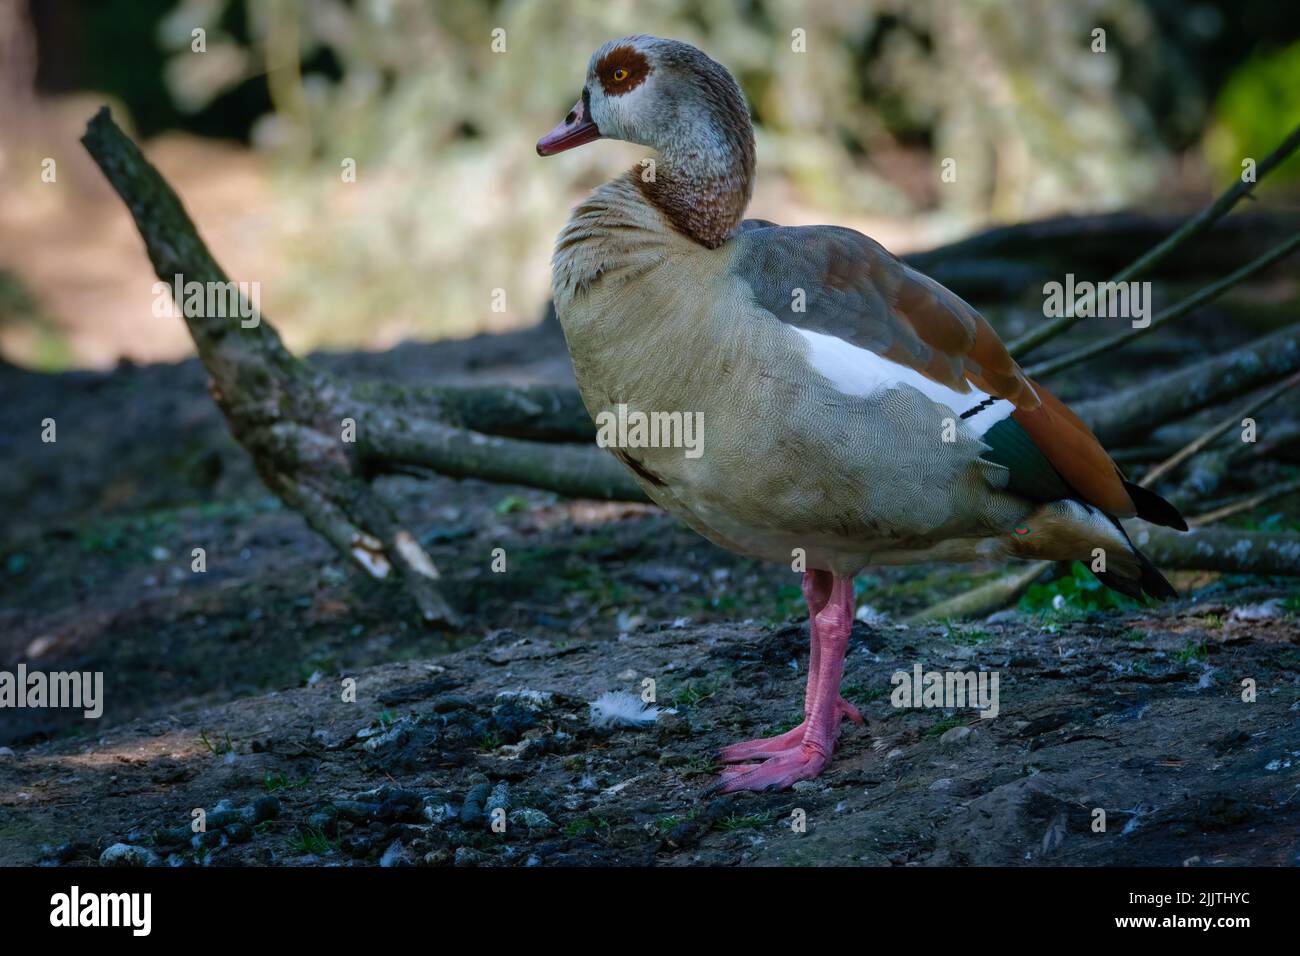 A Egyptian goose in a rural area in a blurred background Stock Photo